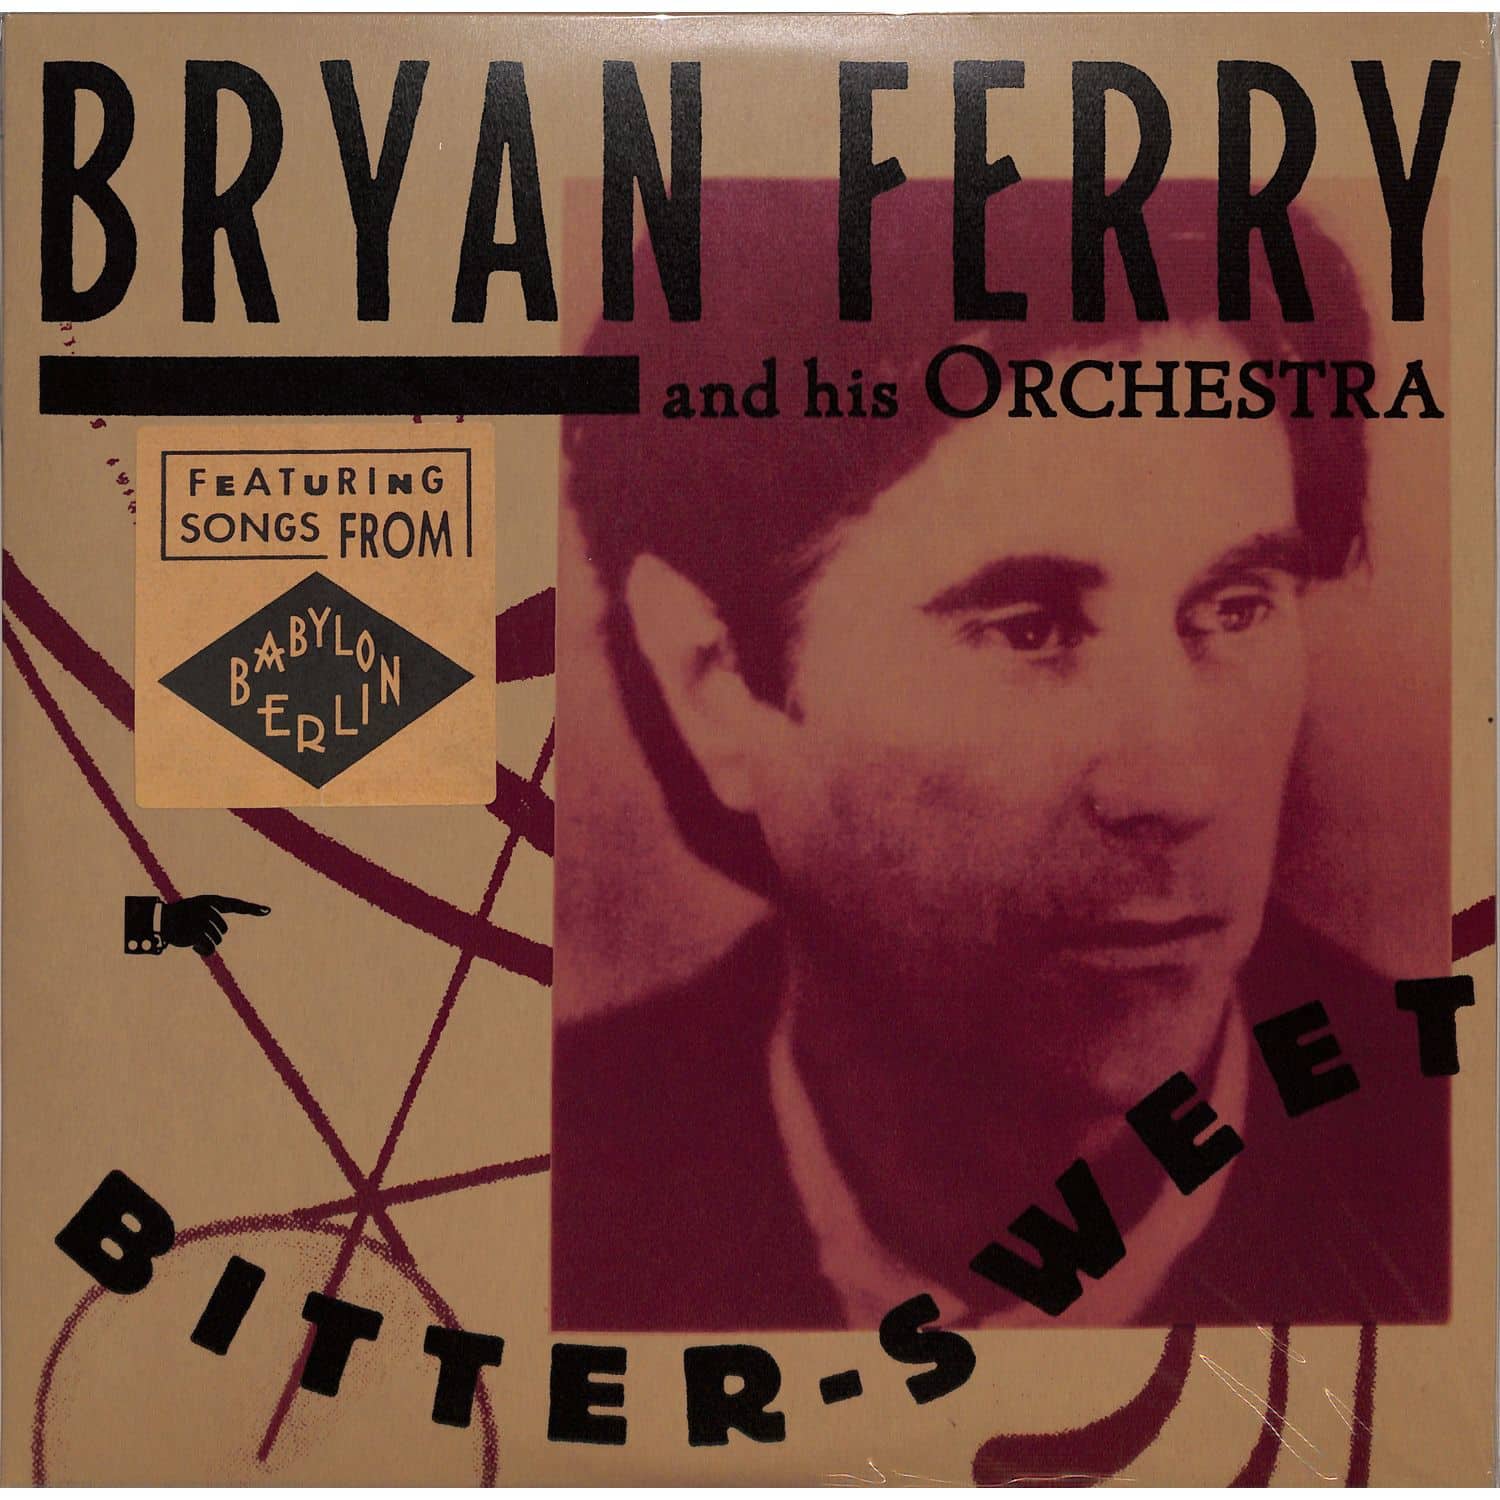 Bryan Ferry and his Orchestra - BITTER-SWEET 